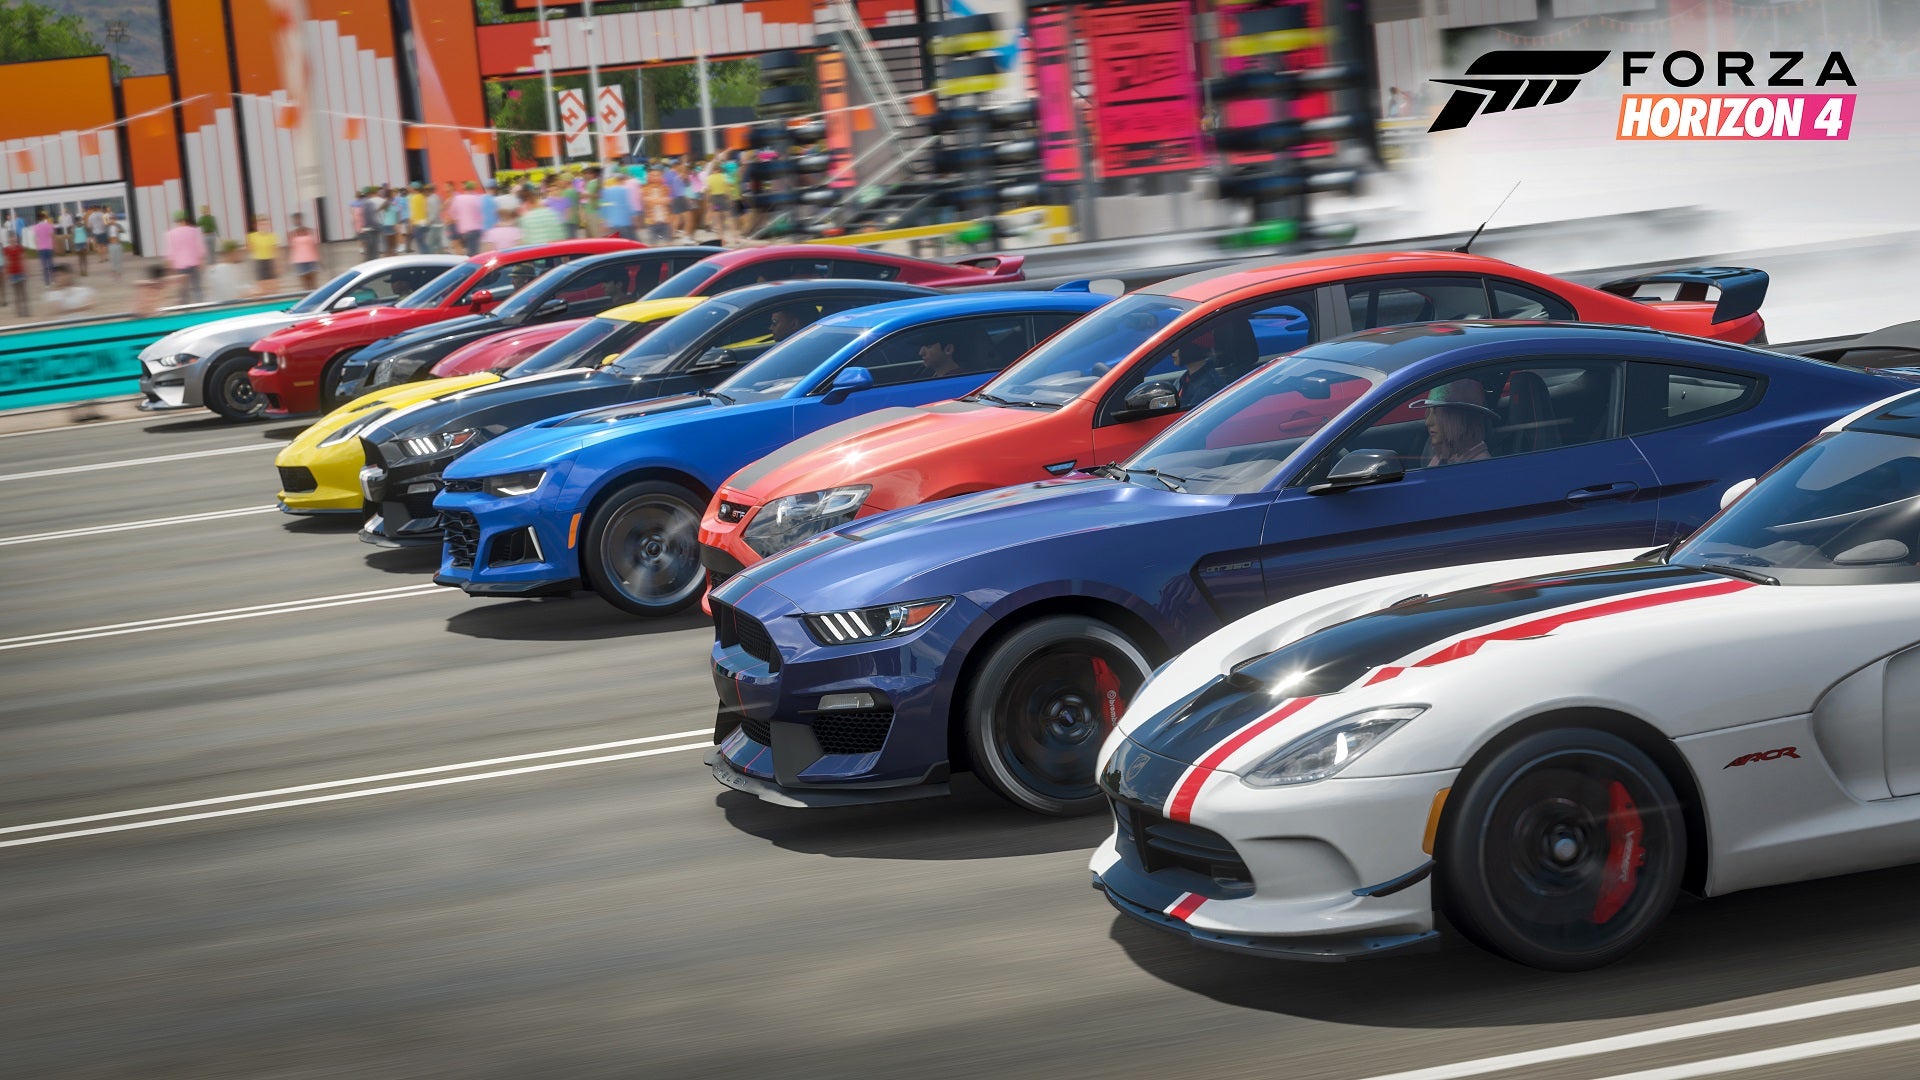 Counterpart Supermarket leader Possible Leak Reveals 120 More Cars Coming to Forza Horizon 4